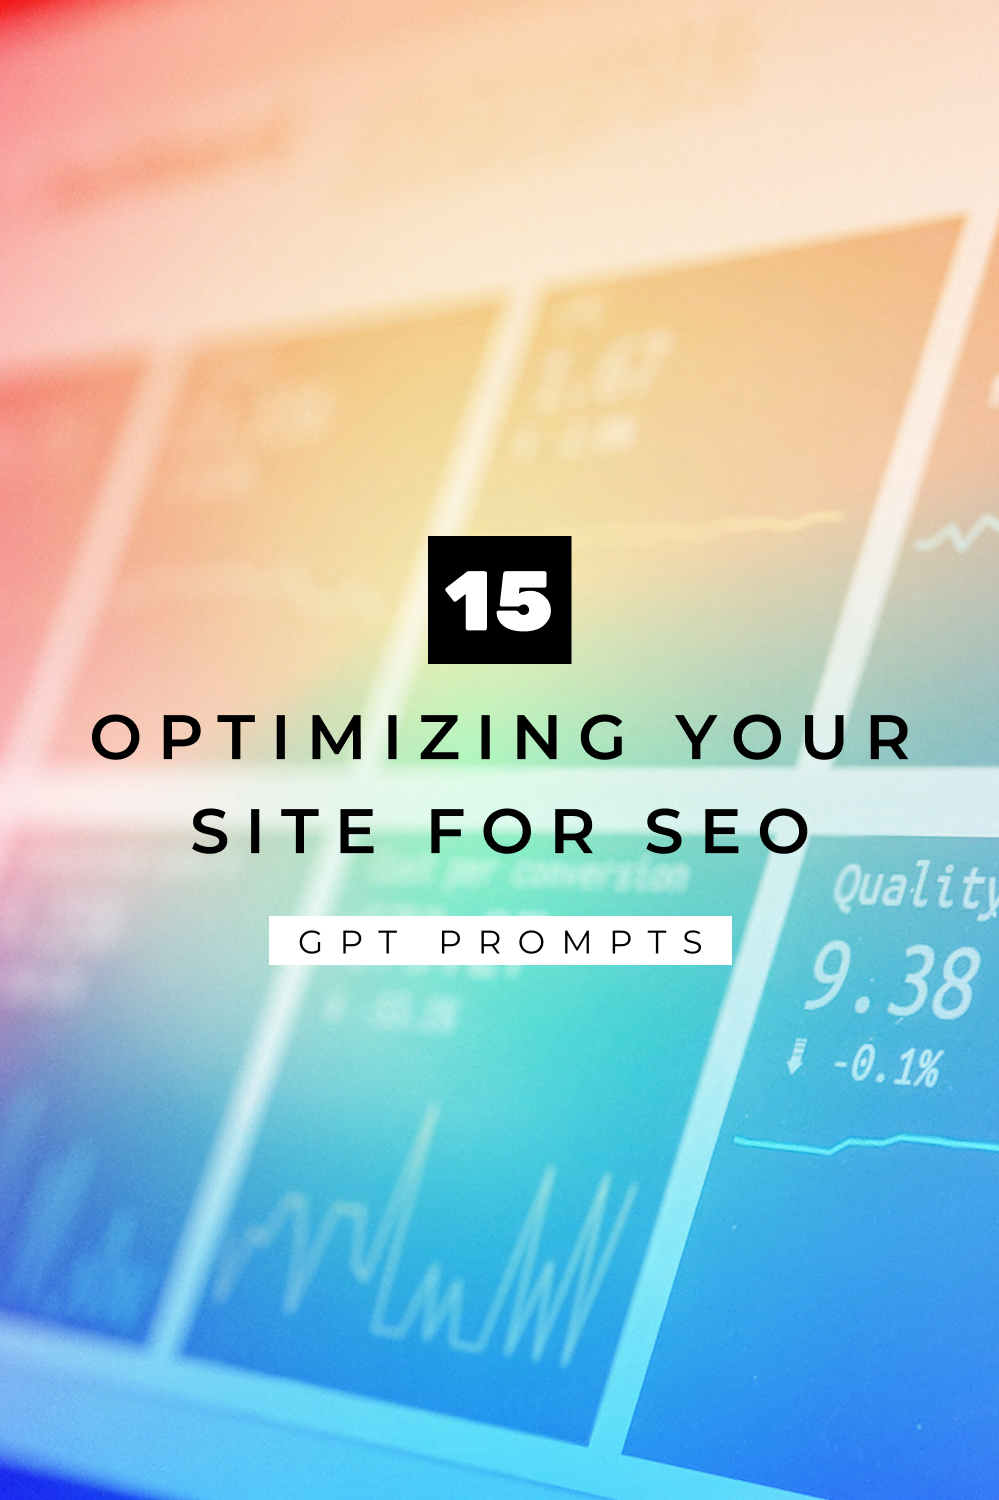 15 optimizing your site for seo 1 467